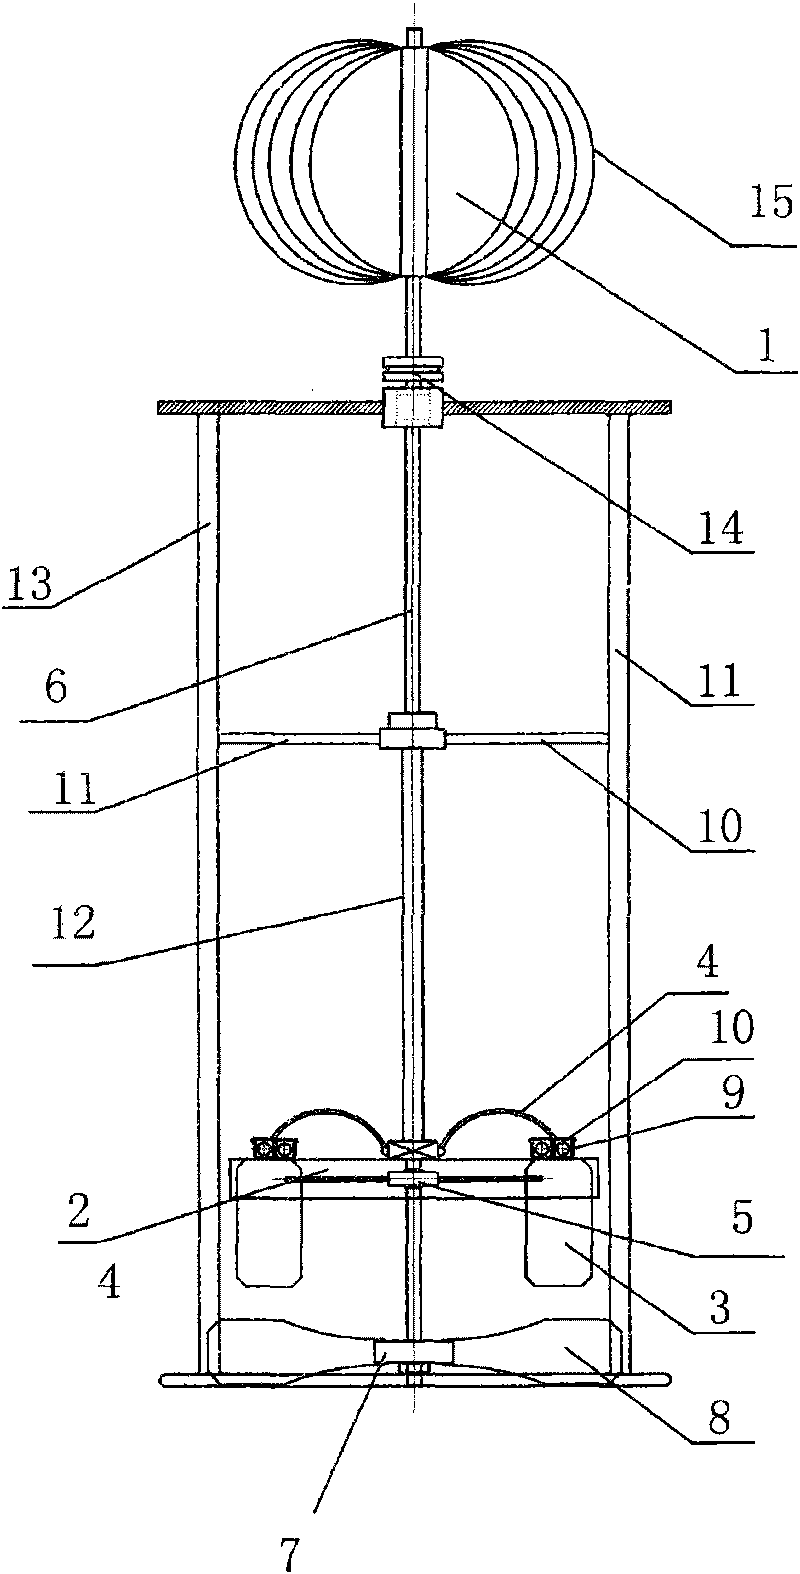 Energy acquisition device of power generation assembly combining energy of wind, tidal current and wave